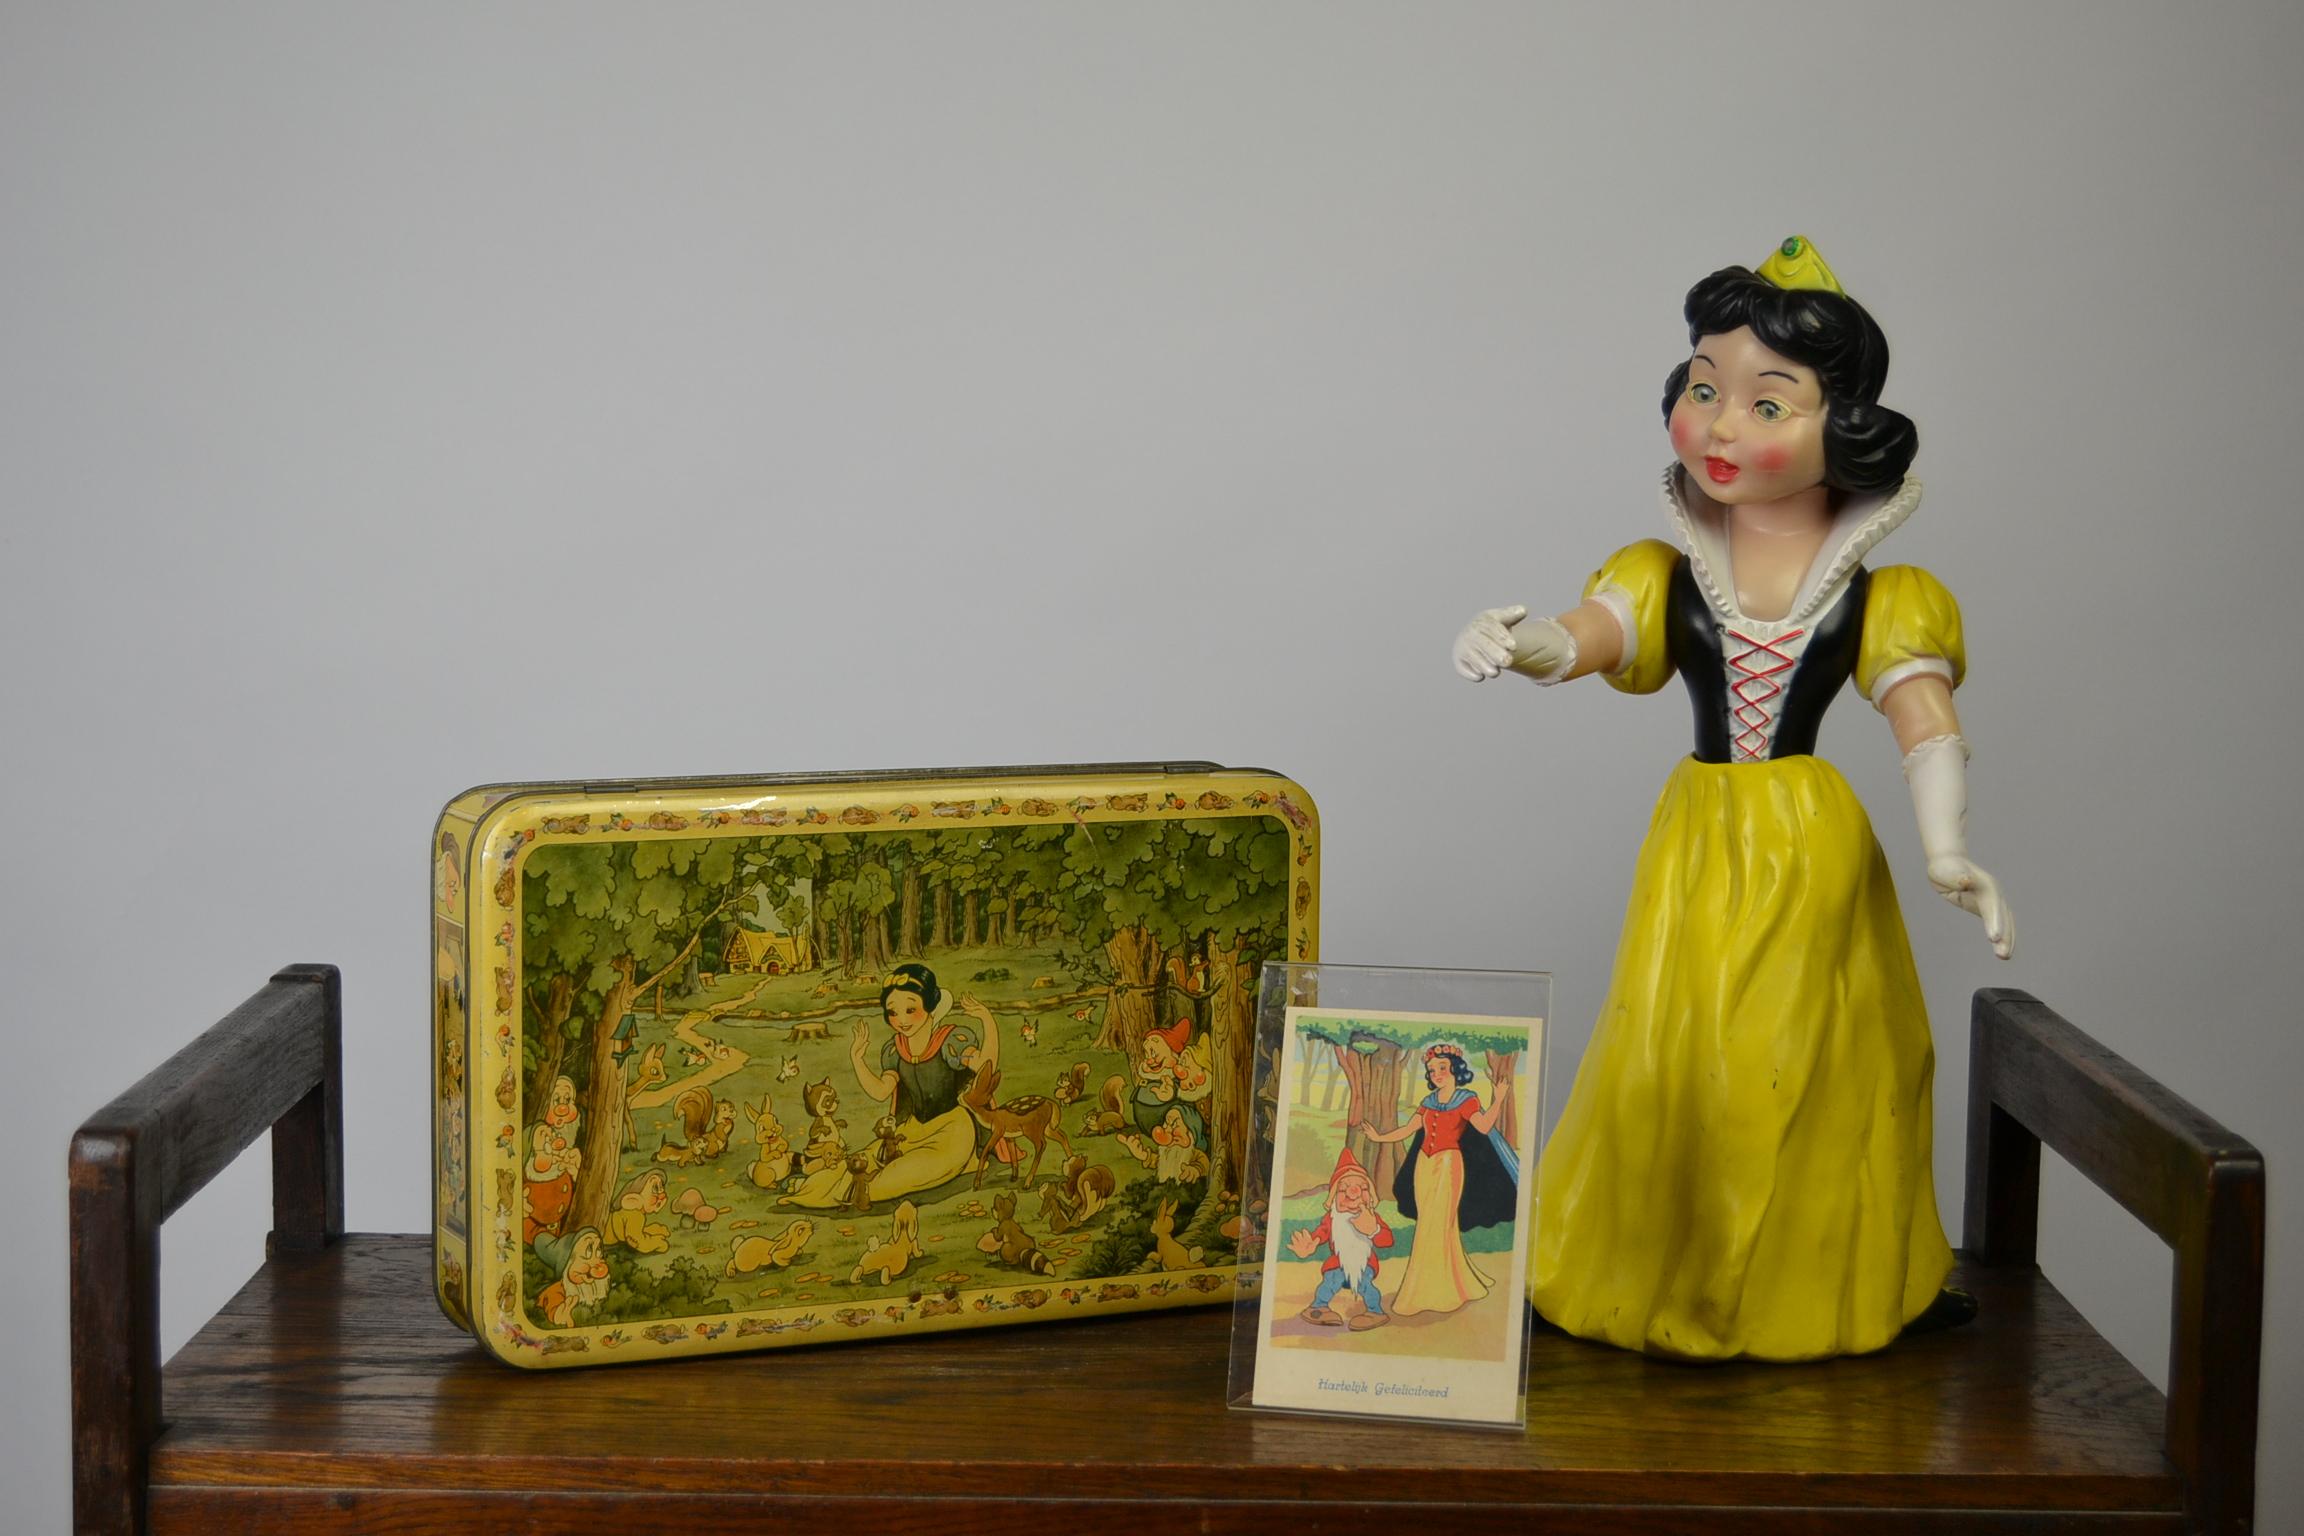 Walt Disney biscuit tin with snow white and the seven dwarfs.
Great design with snow white and the seven dwarfs: Doc, Happy, Grumpy, Sleepy, Bashful, Sneezy and Dopey. Also the Queen can't miss. Snow white sitting in the forrest surrounded with